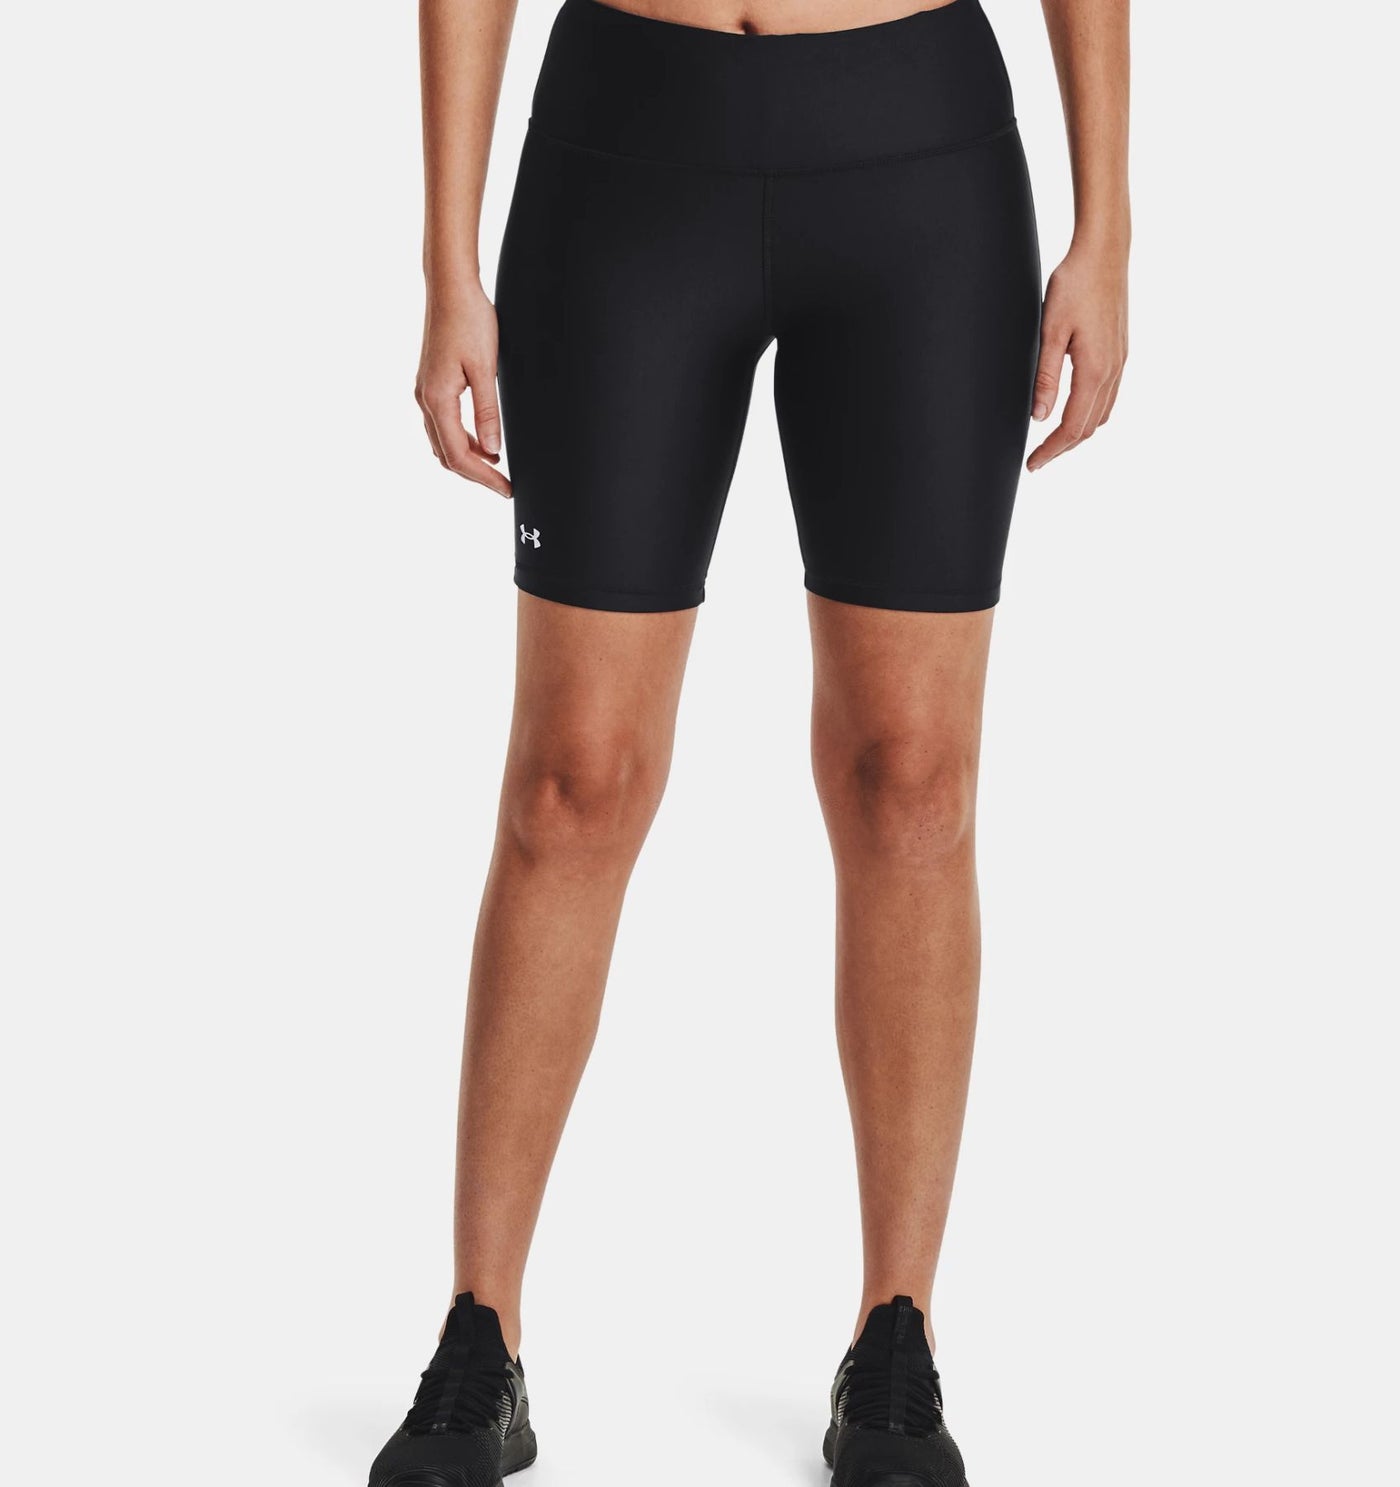 1360939-001 - Shorts - Under Armour